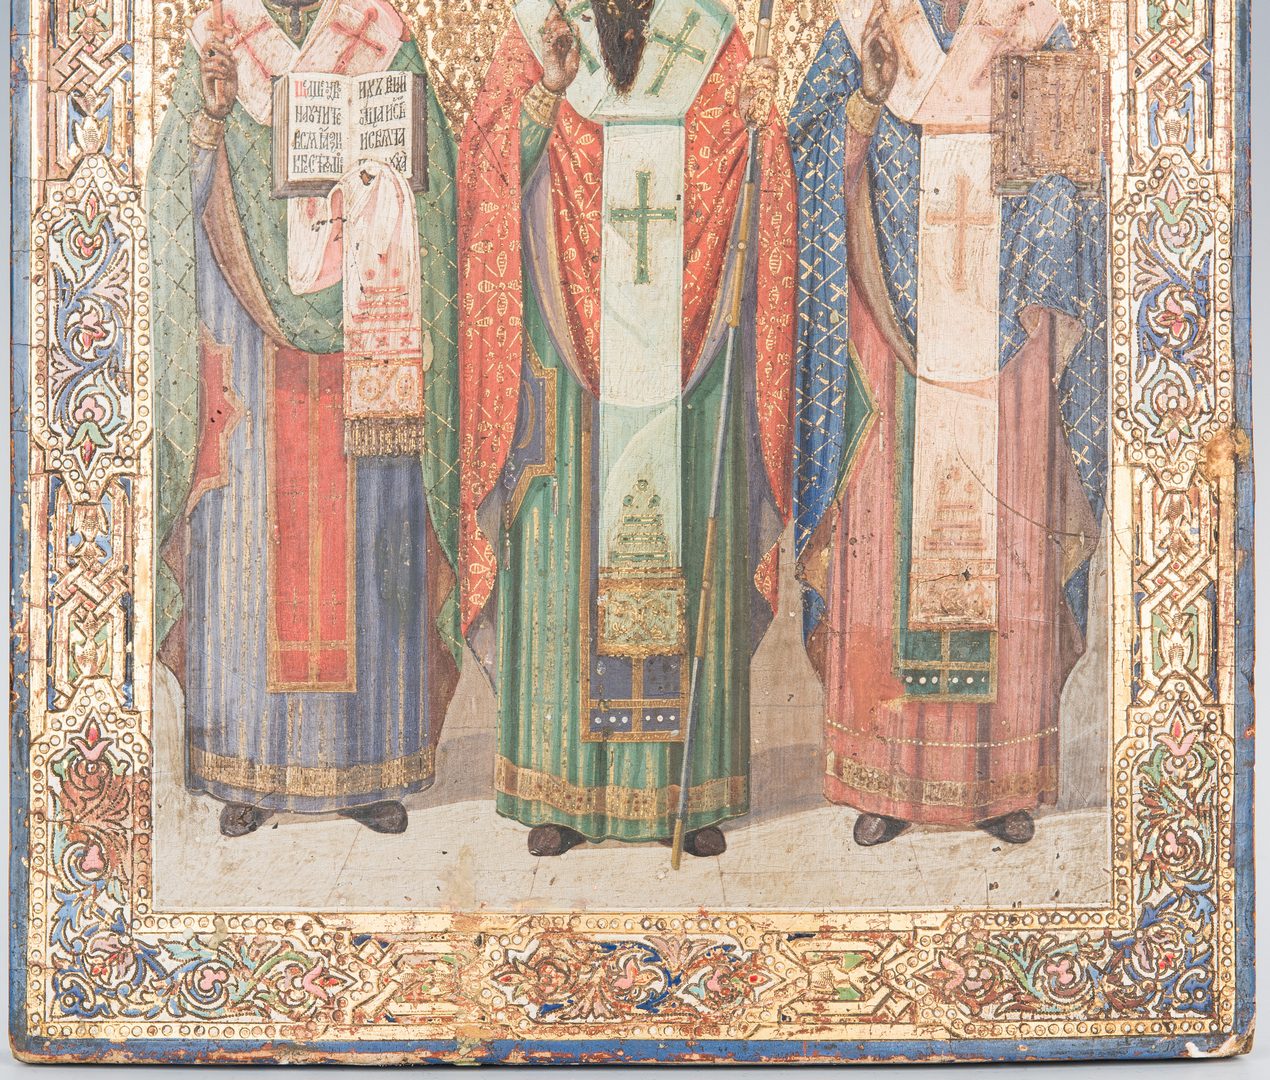 Lot 88: 19th Century Russian Icon with 3 Saints